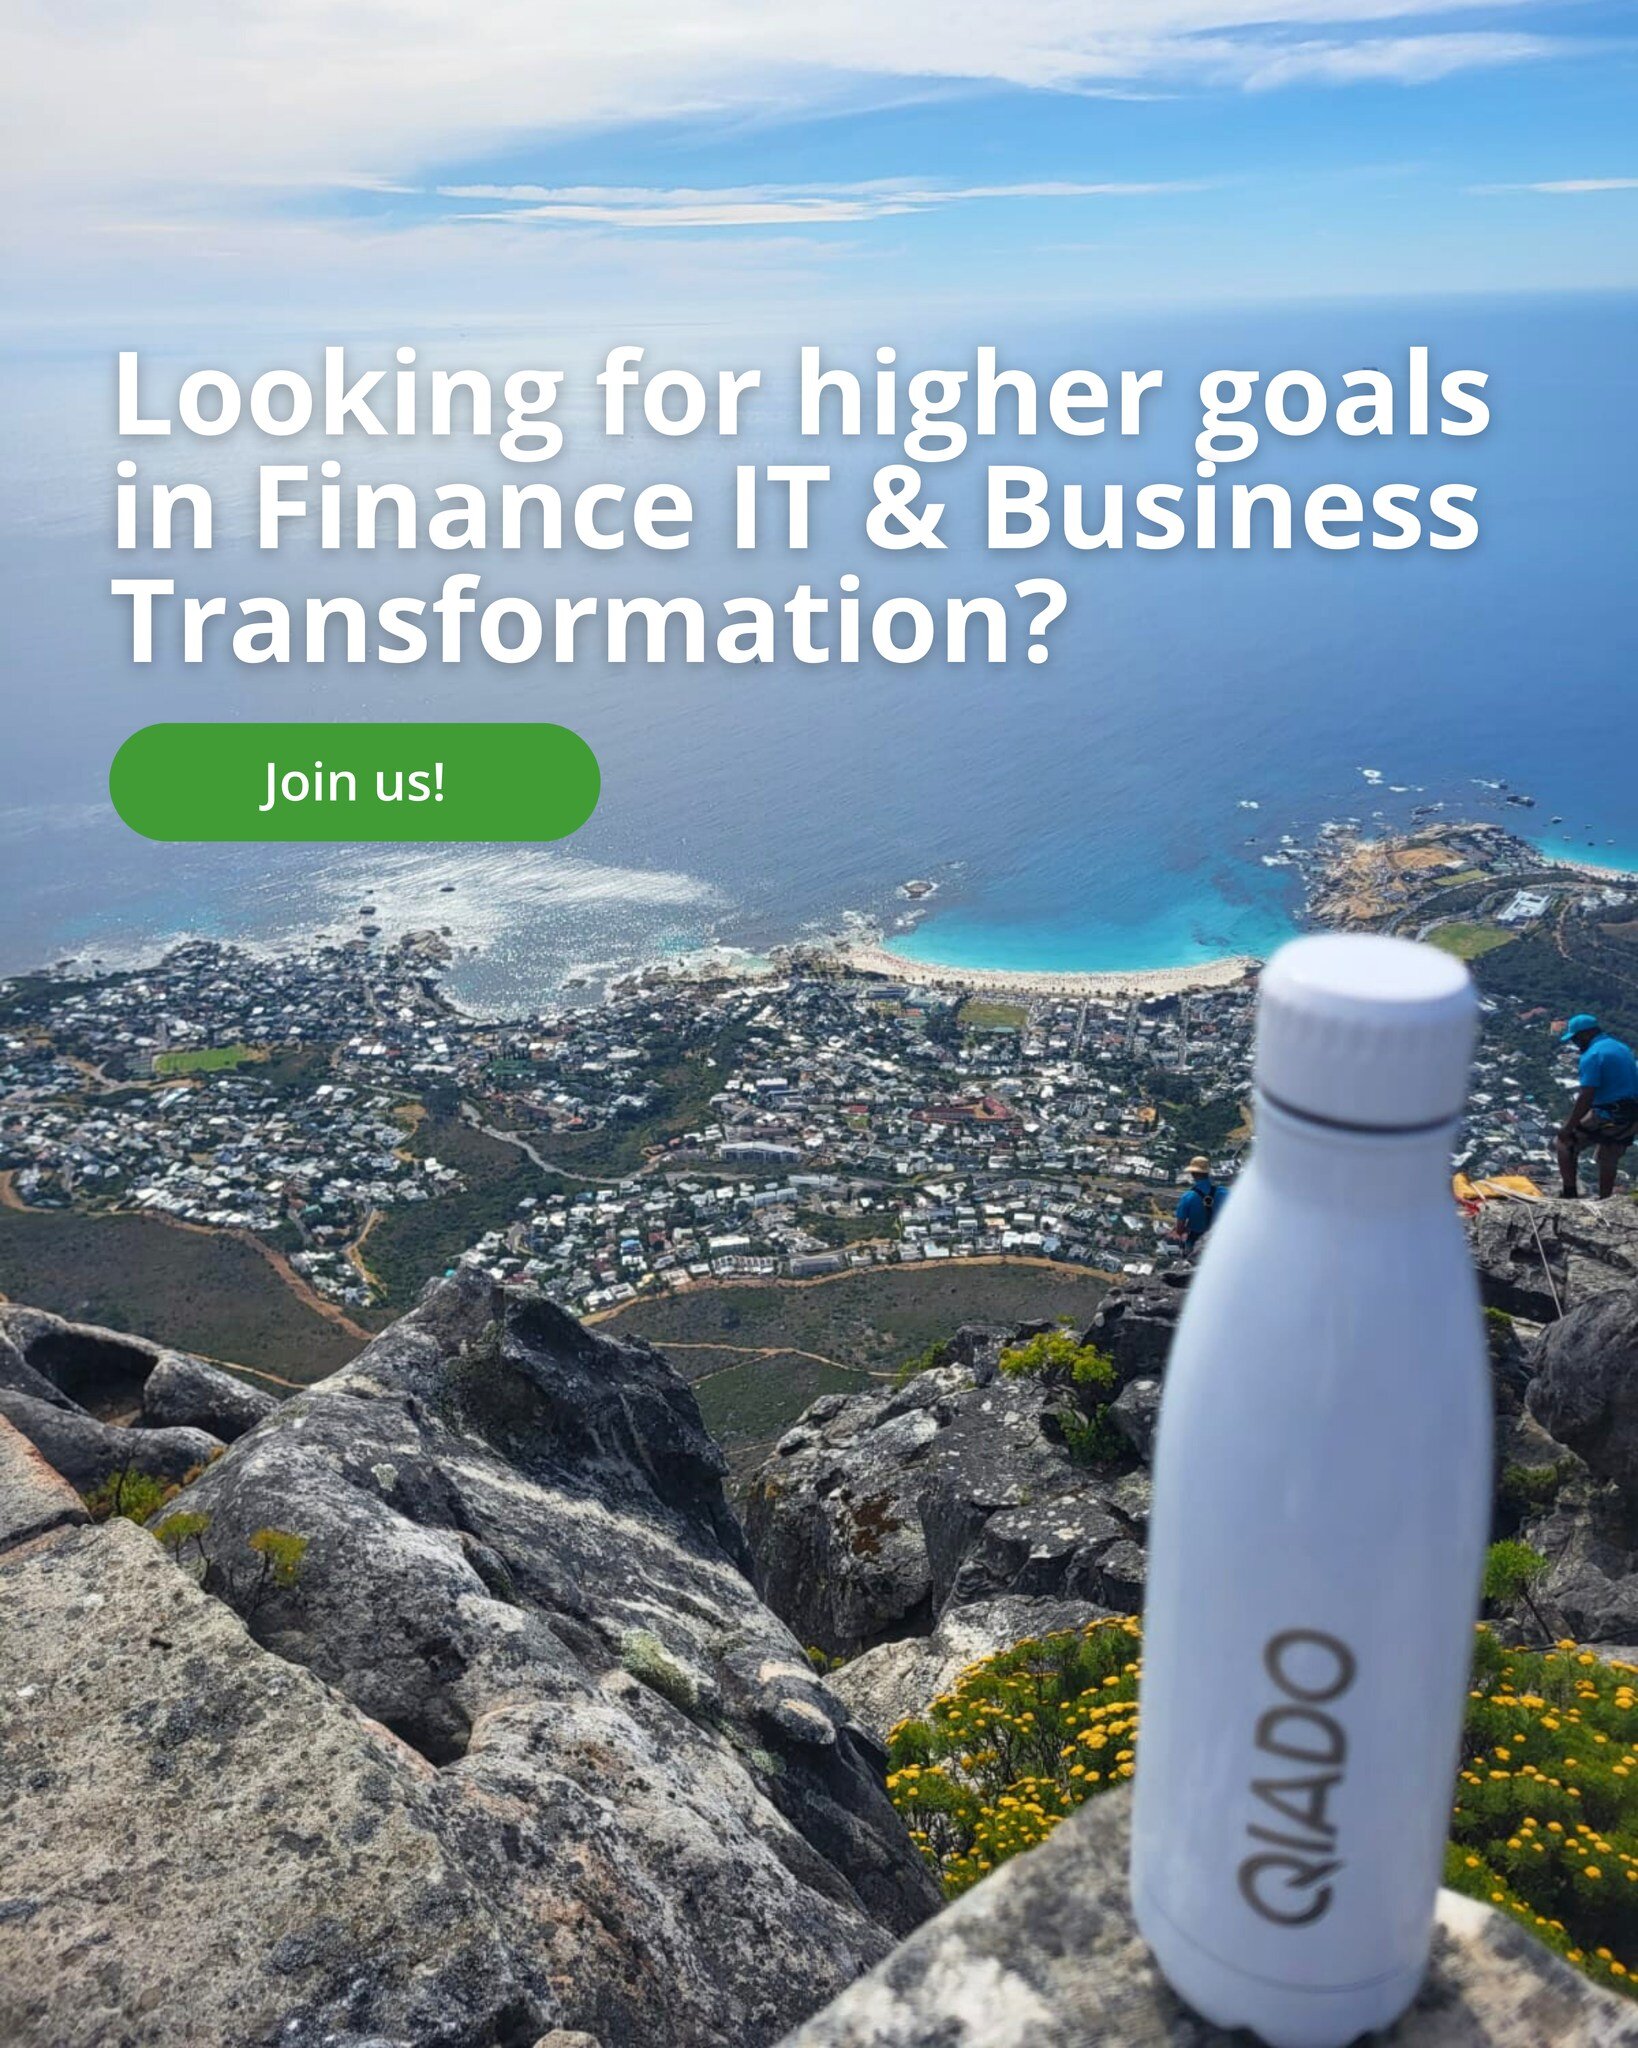 The right place for those who want to exceed and go higher in #FinanceIT and Business Transformation. 🚀 Join us: www.qiado.com/careers 

📸 Shared by Roberta Rebelo, #SAPREFX expert - Cape Town, December 2023